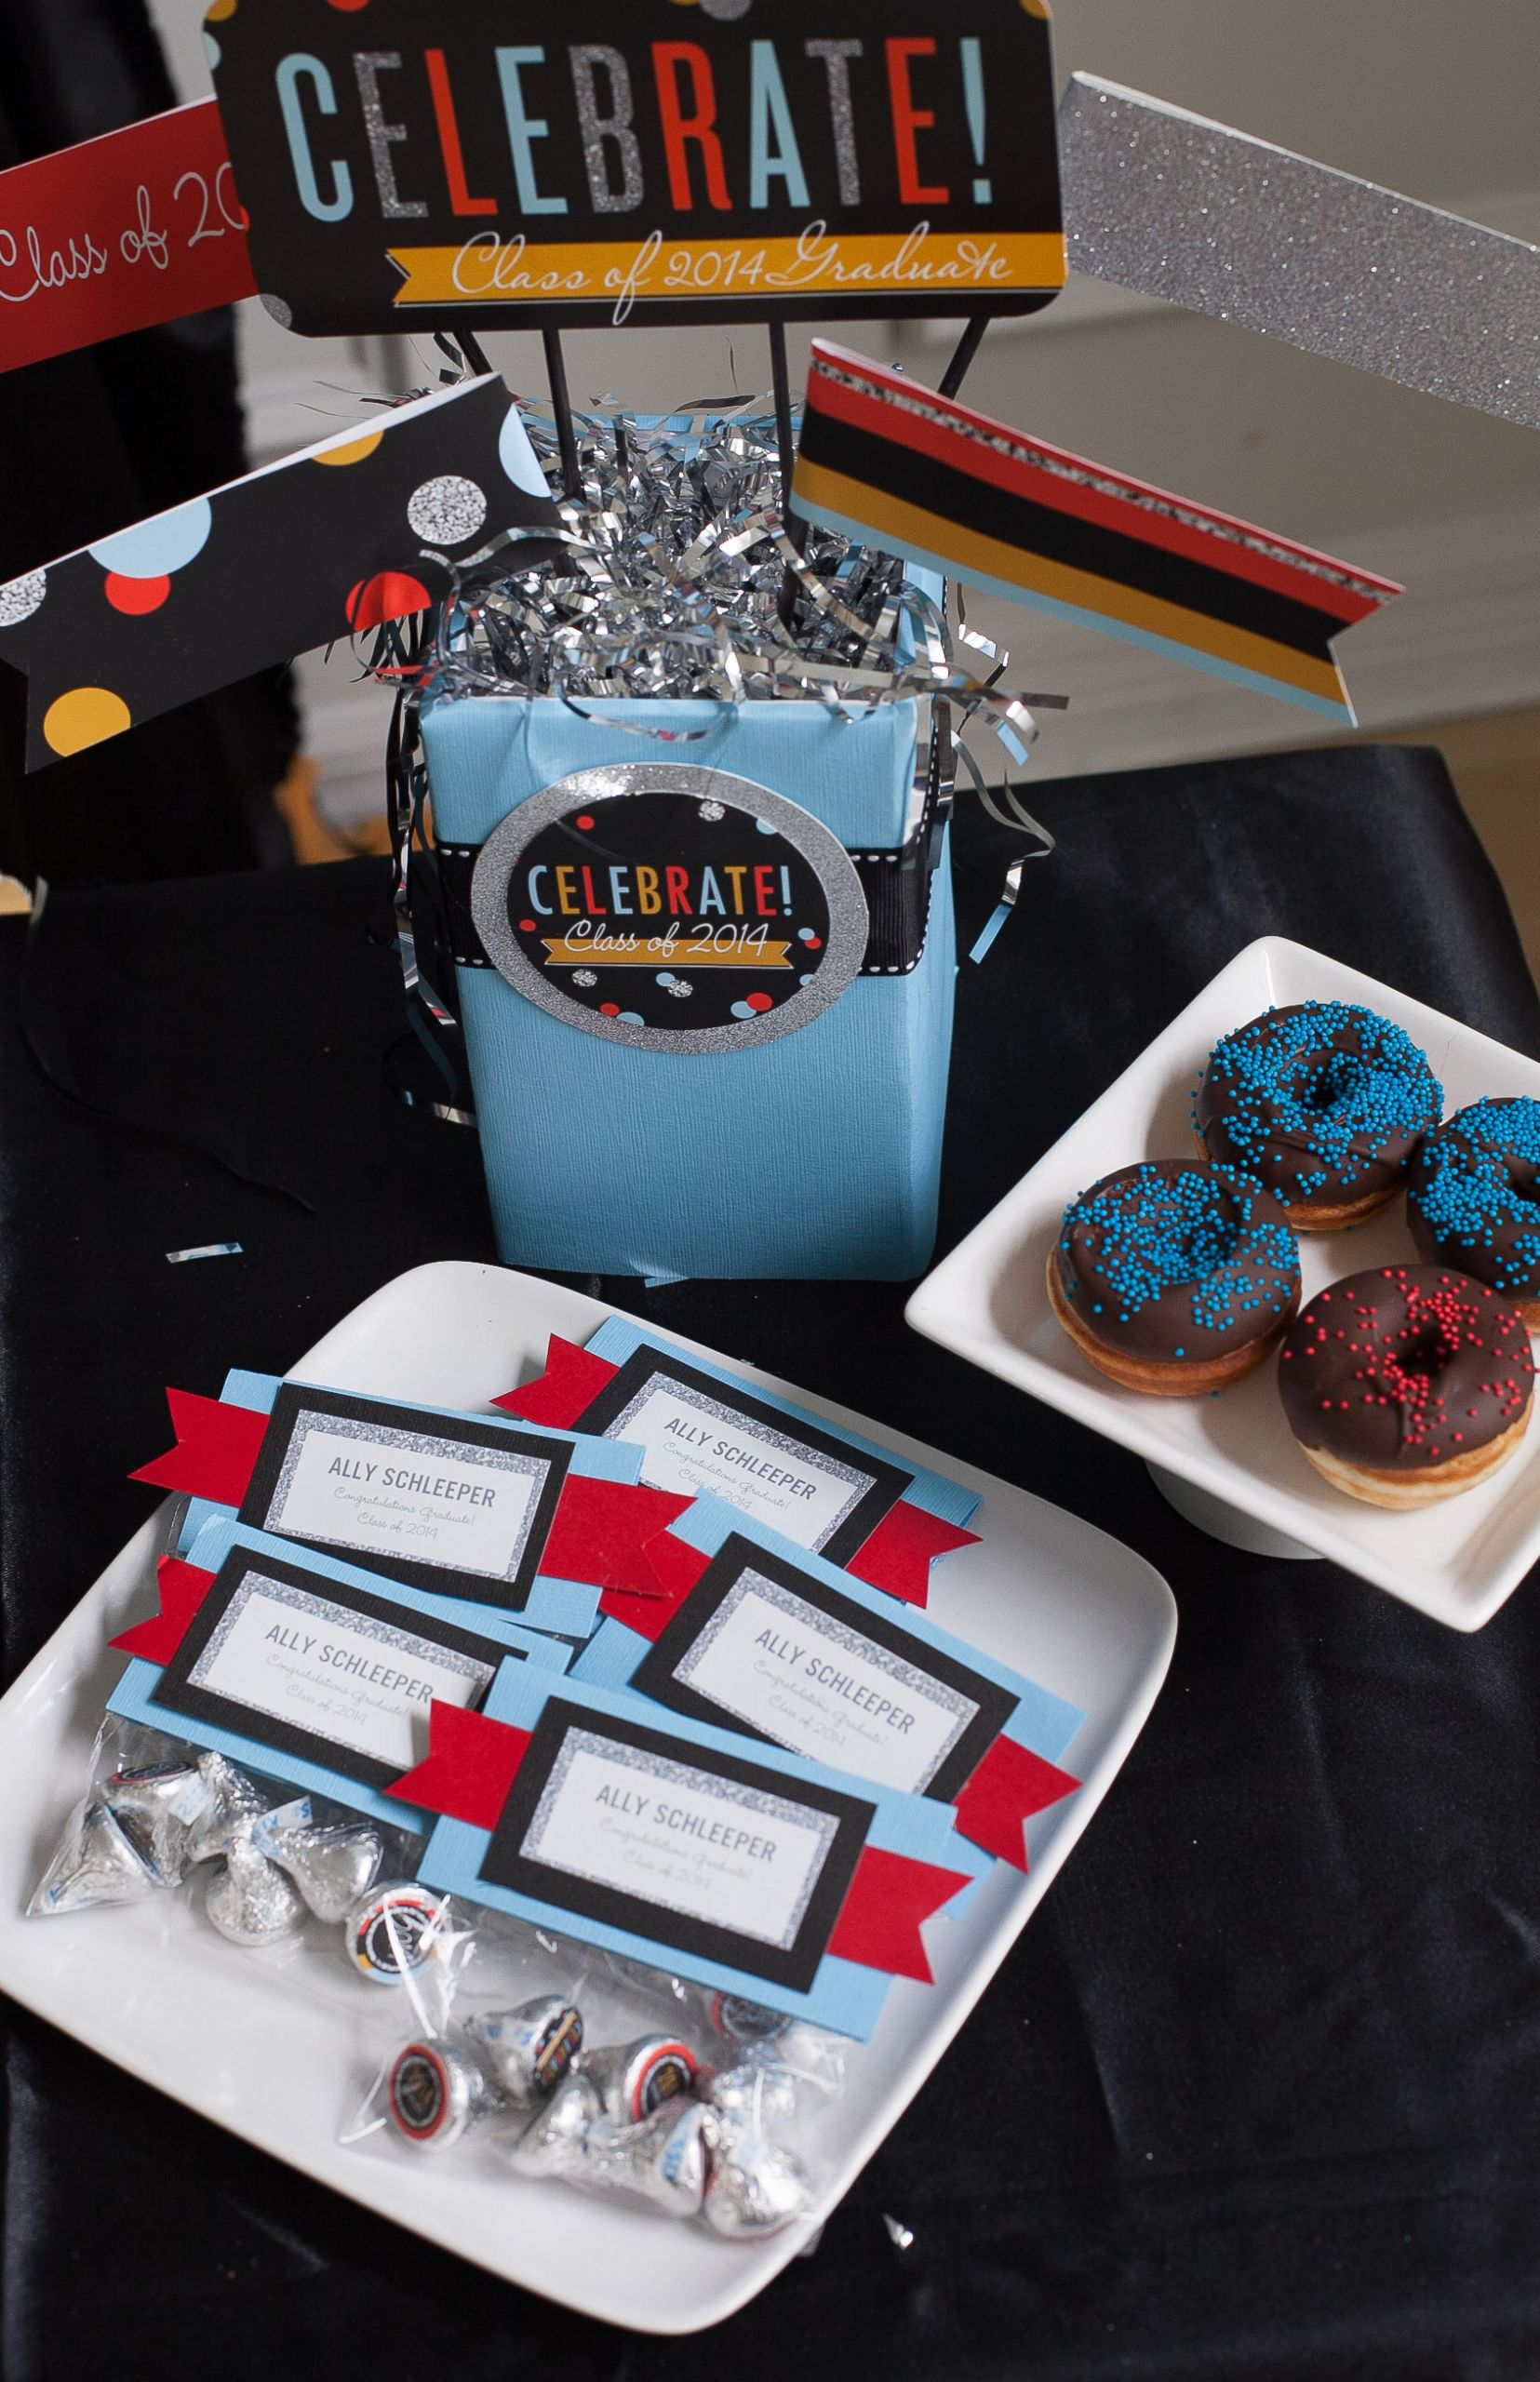 Free Graduation Party Ideas
 Graduation Party Ideas Inspiration and Free Printables